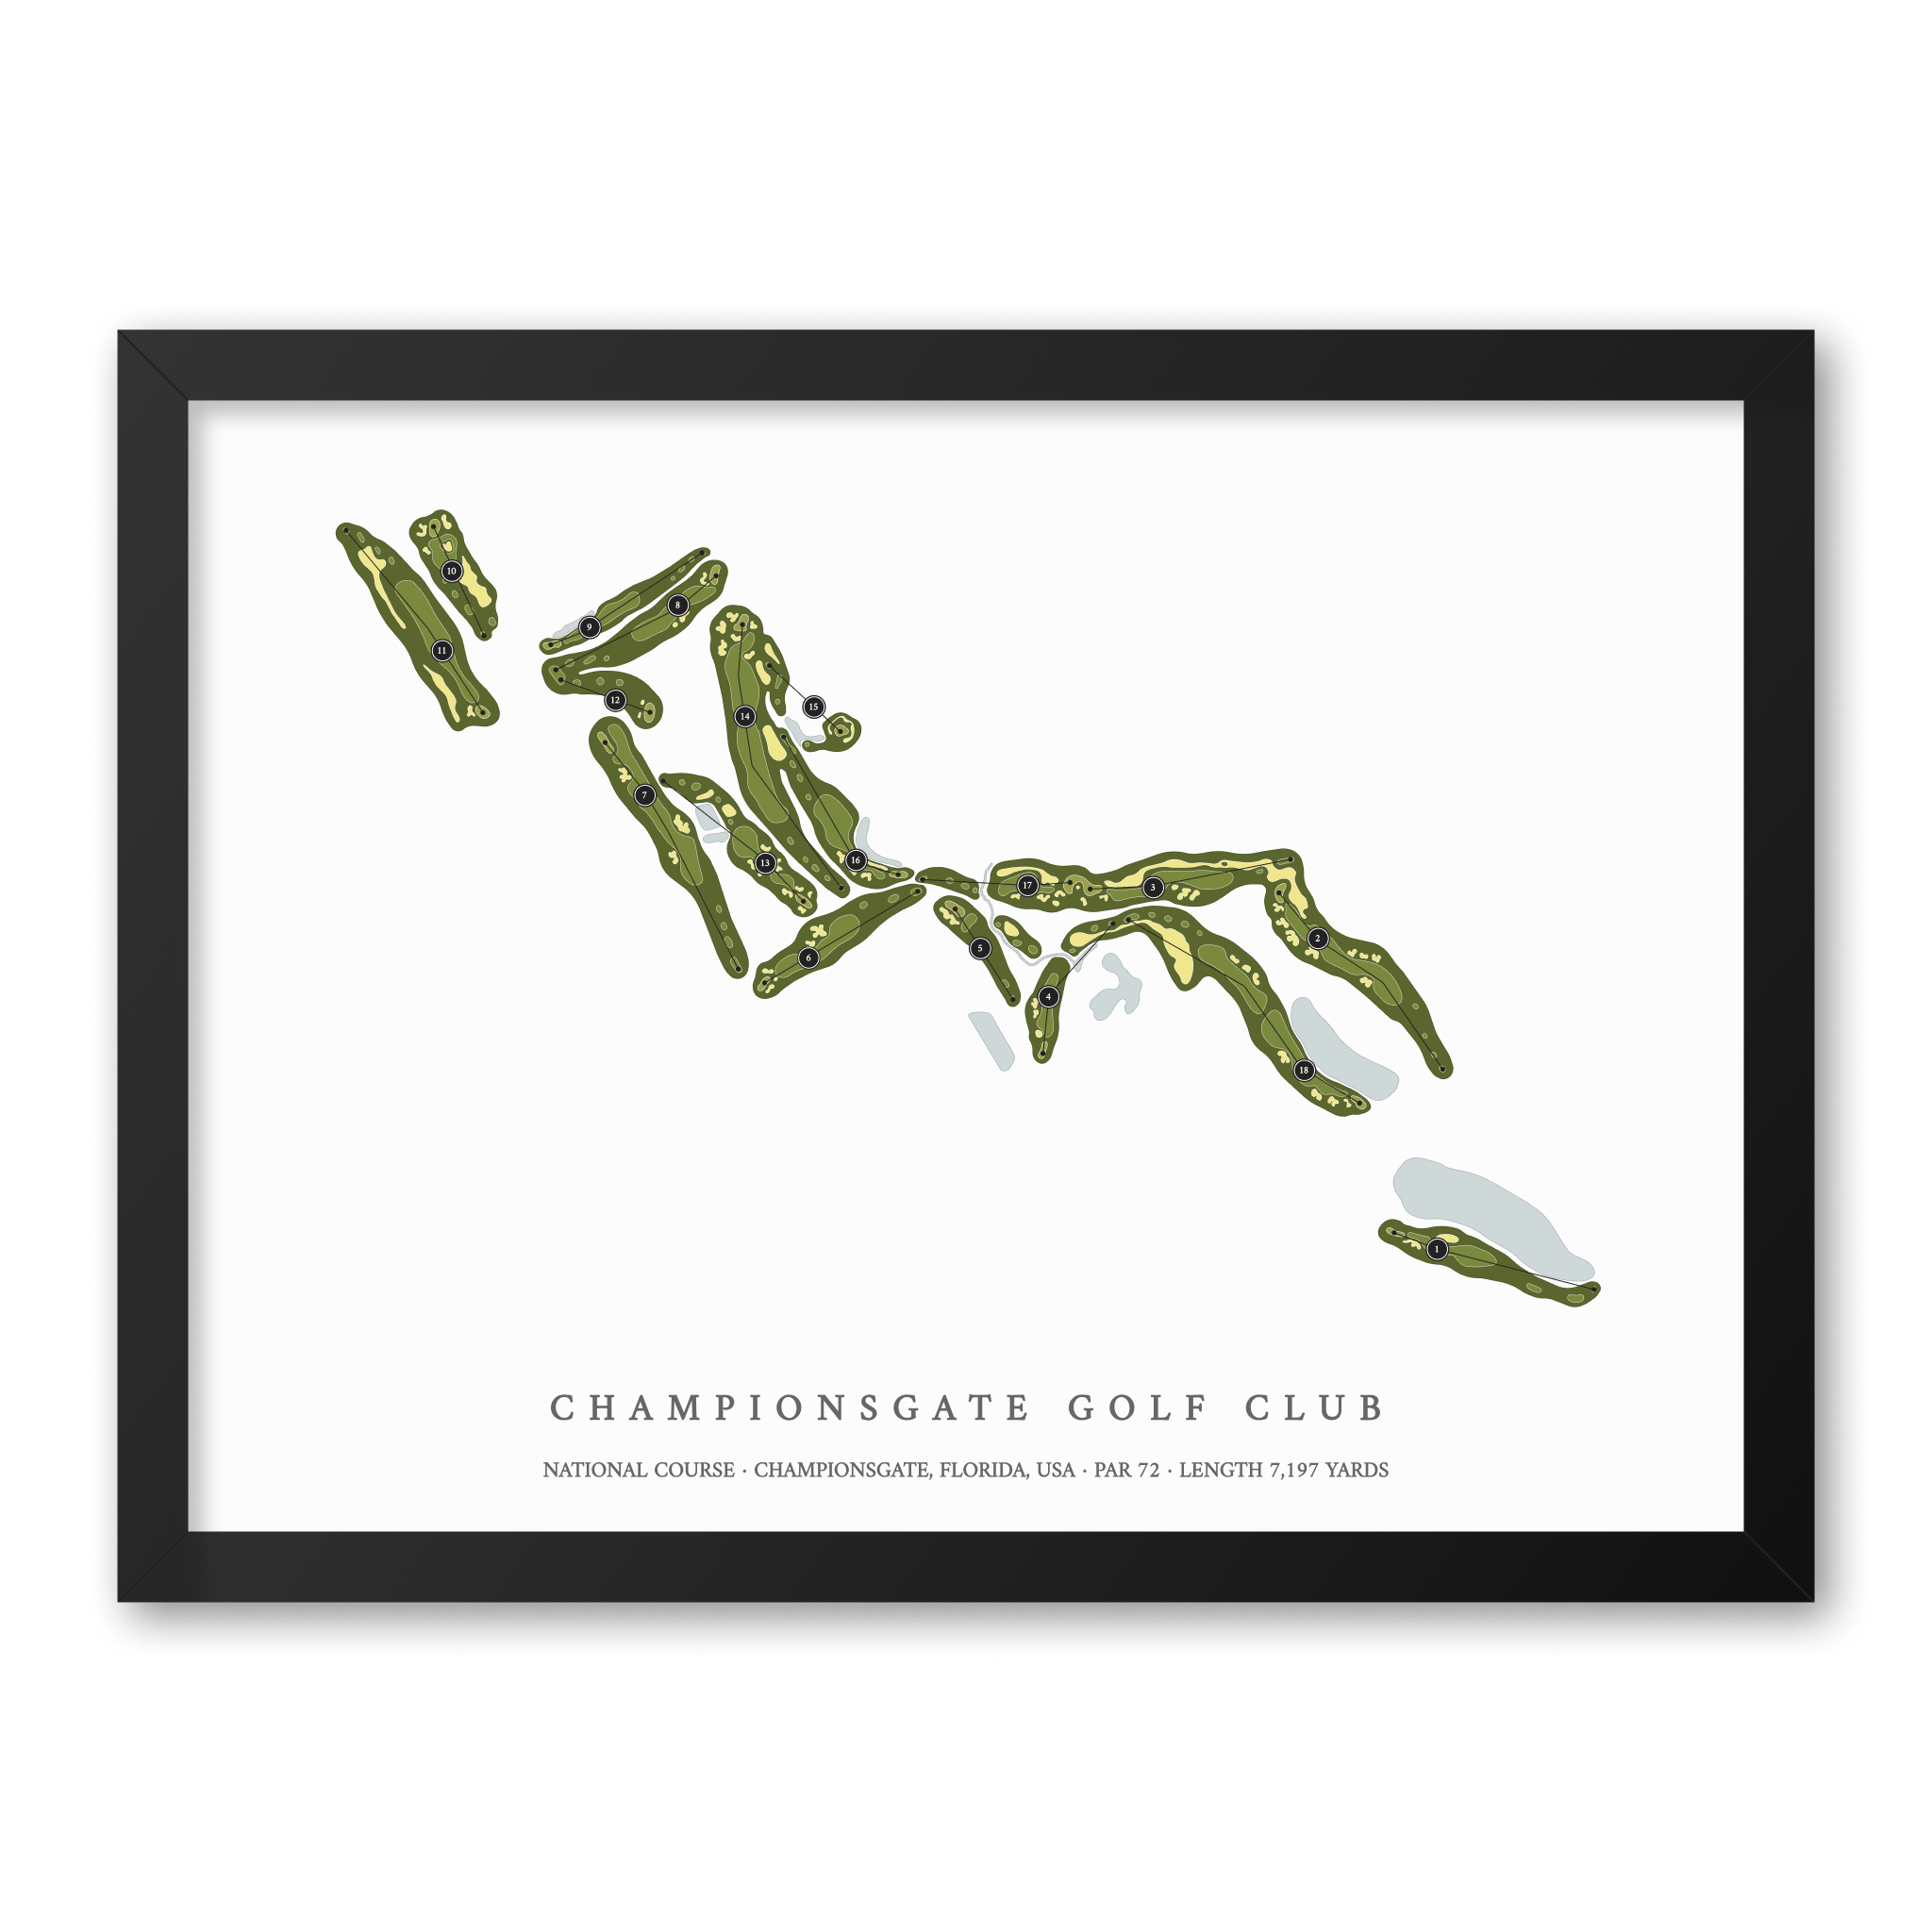 ChampionsGate Golf Club - National Course | Golf Course Map | Black Frame With Hole Numbers #hole numbers_yes